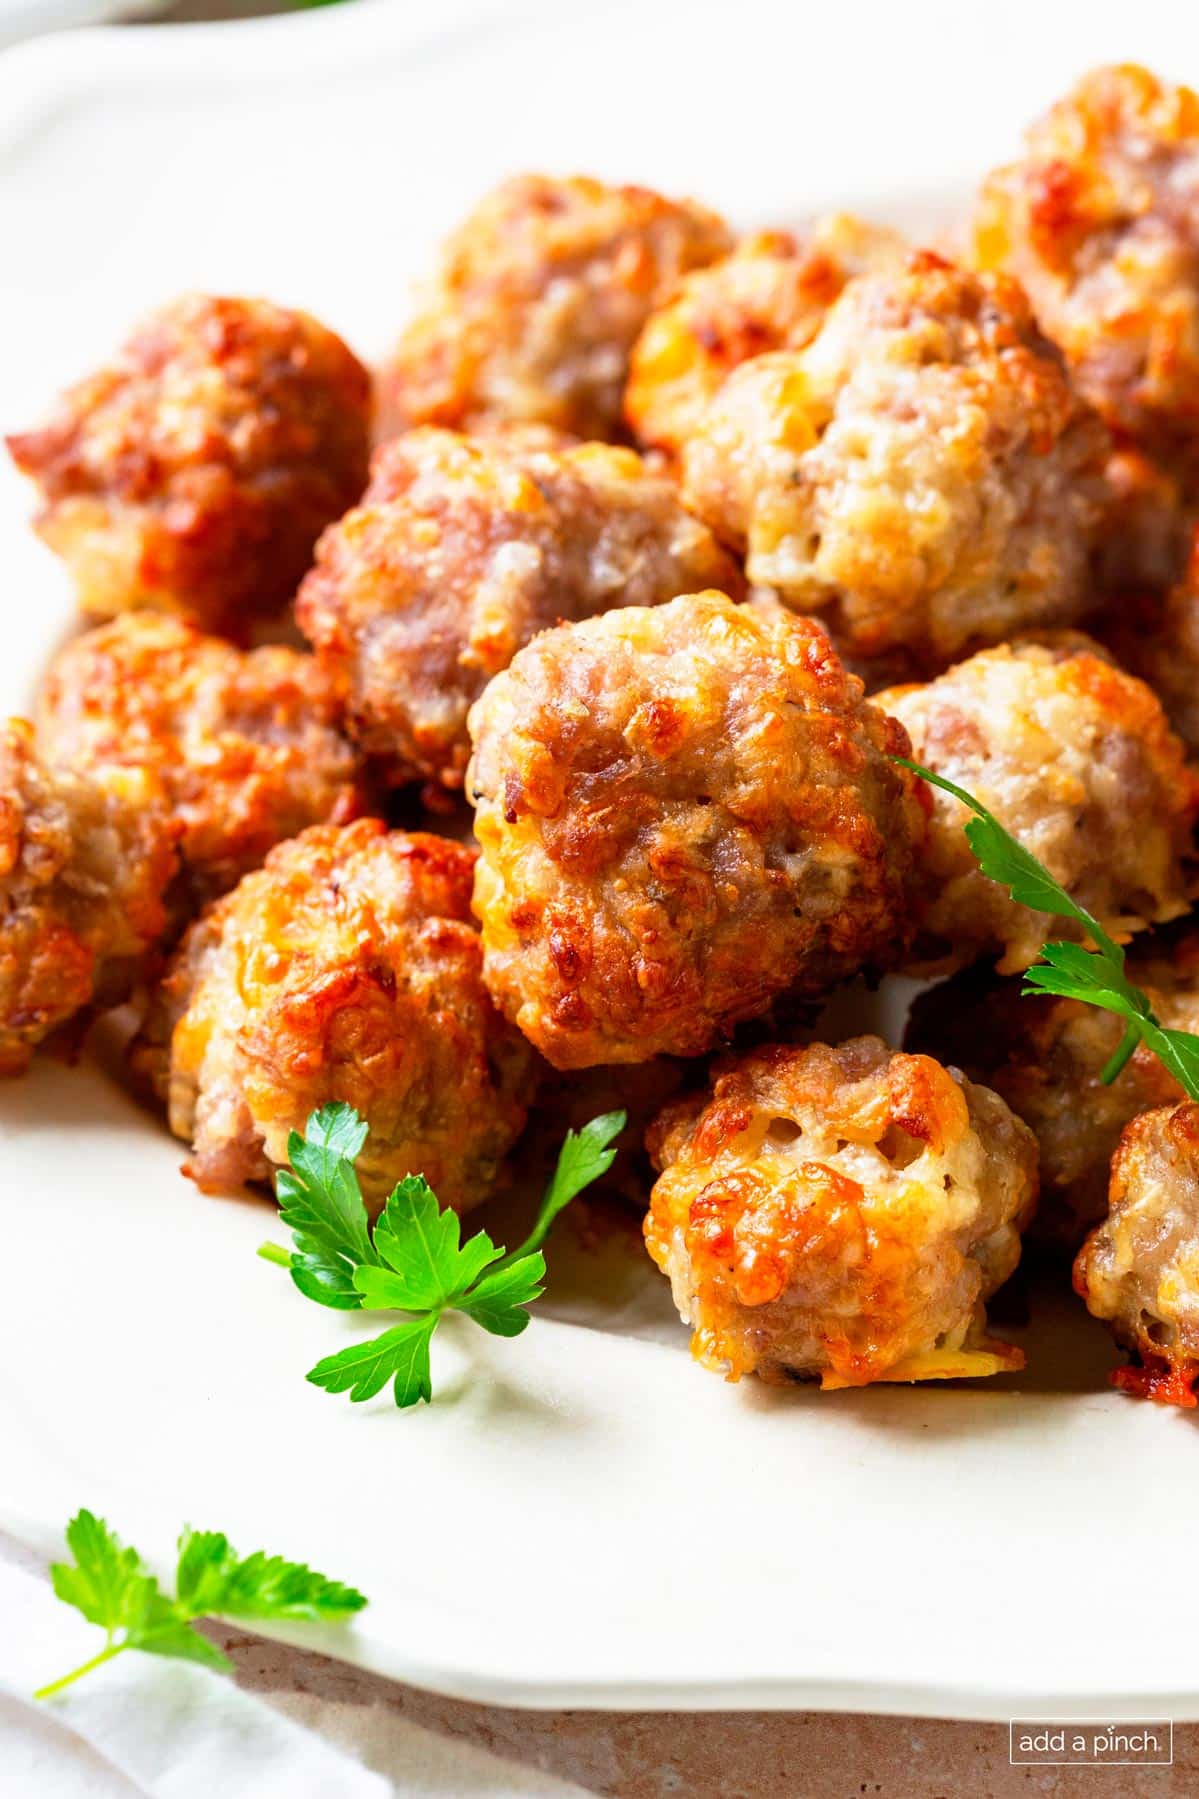 Photo of cooked sausage balls on a white serving plate.